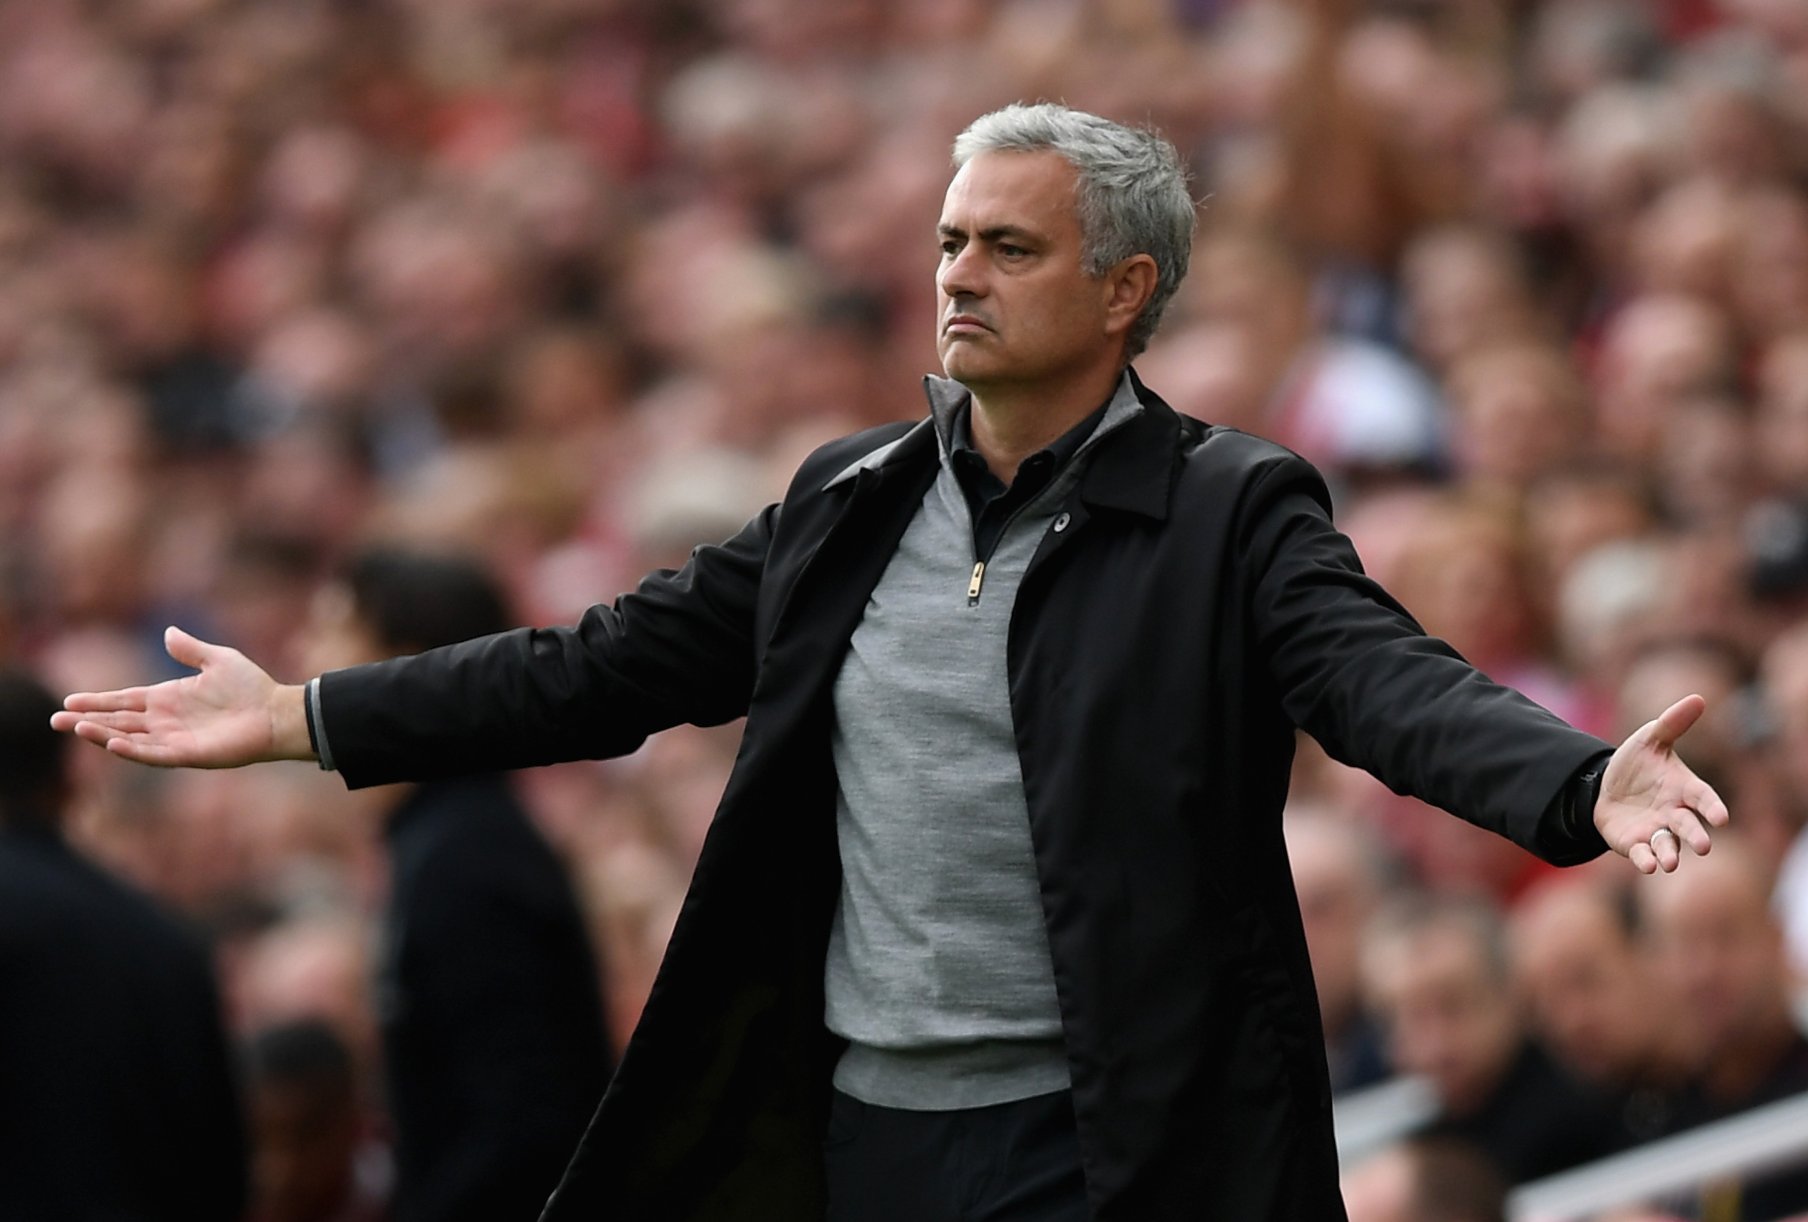 Mourinho launches attack on United duo after Brighton defeat